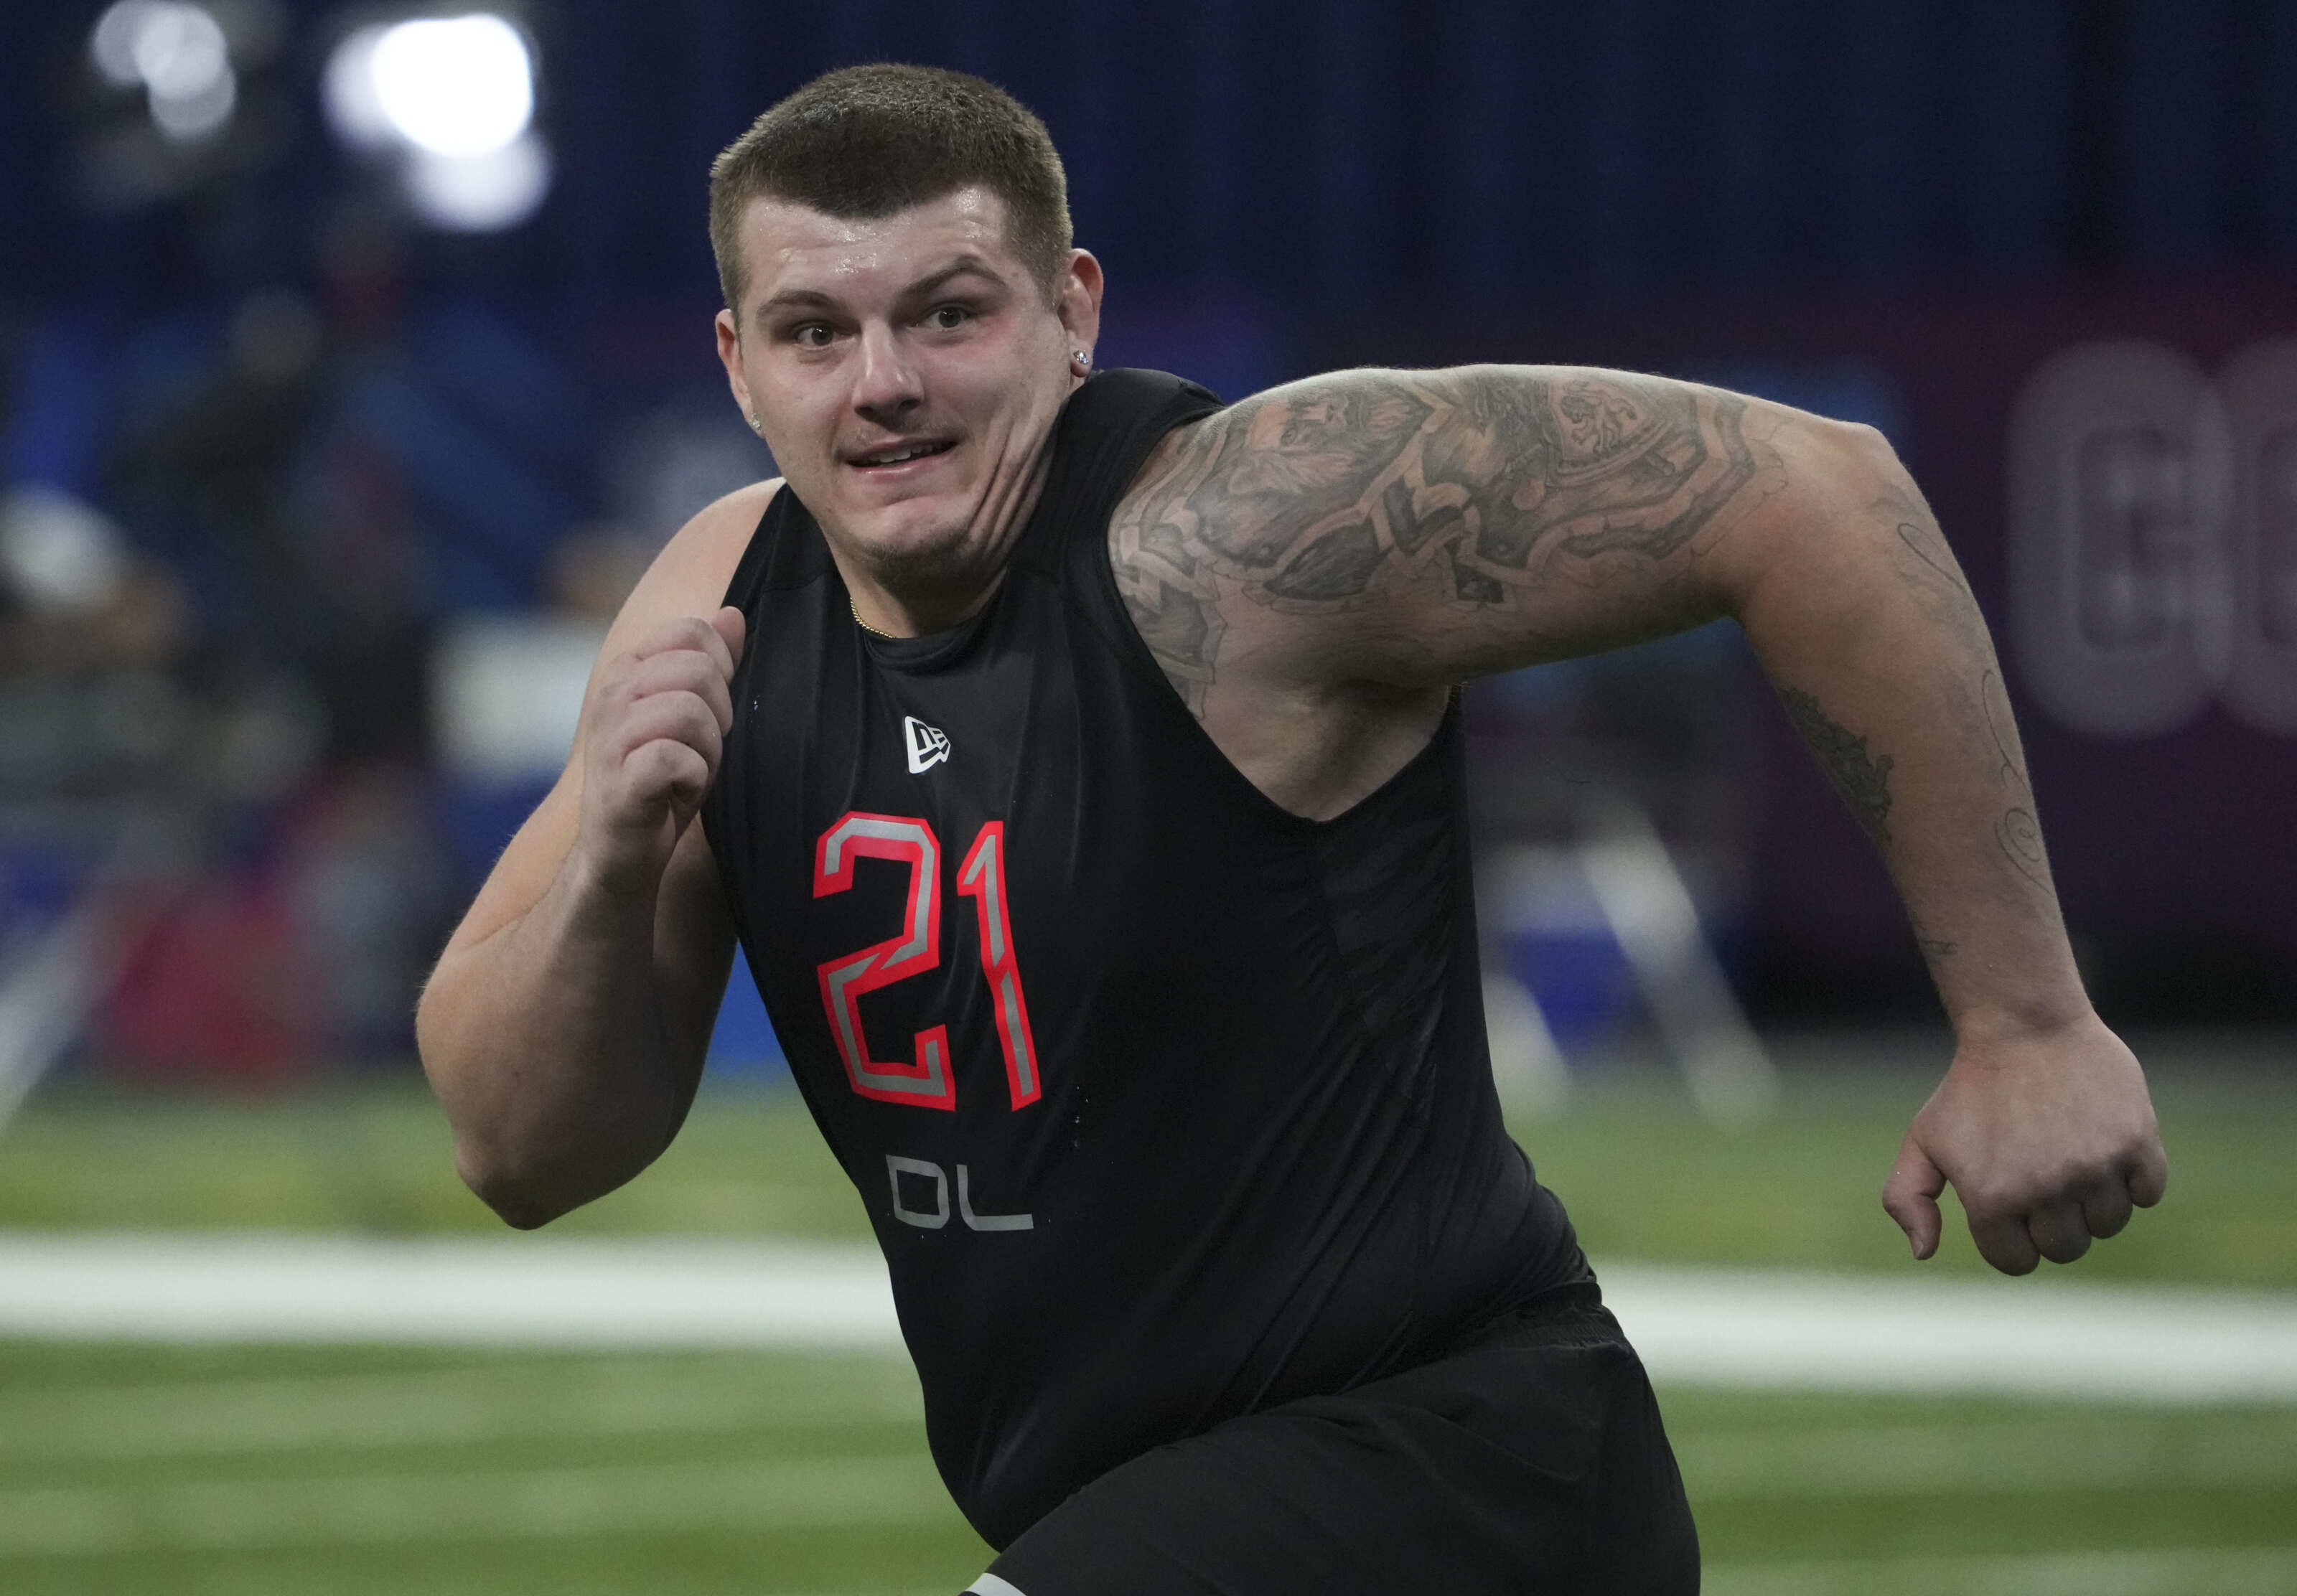 Arkansas Football: What the experts say about each Razorback in the 2022  NFL Draft